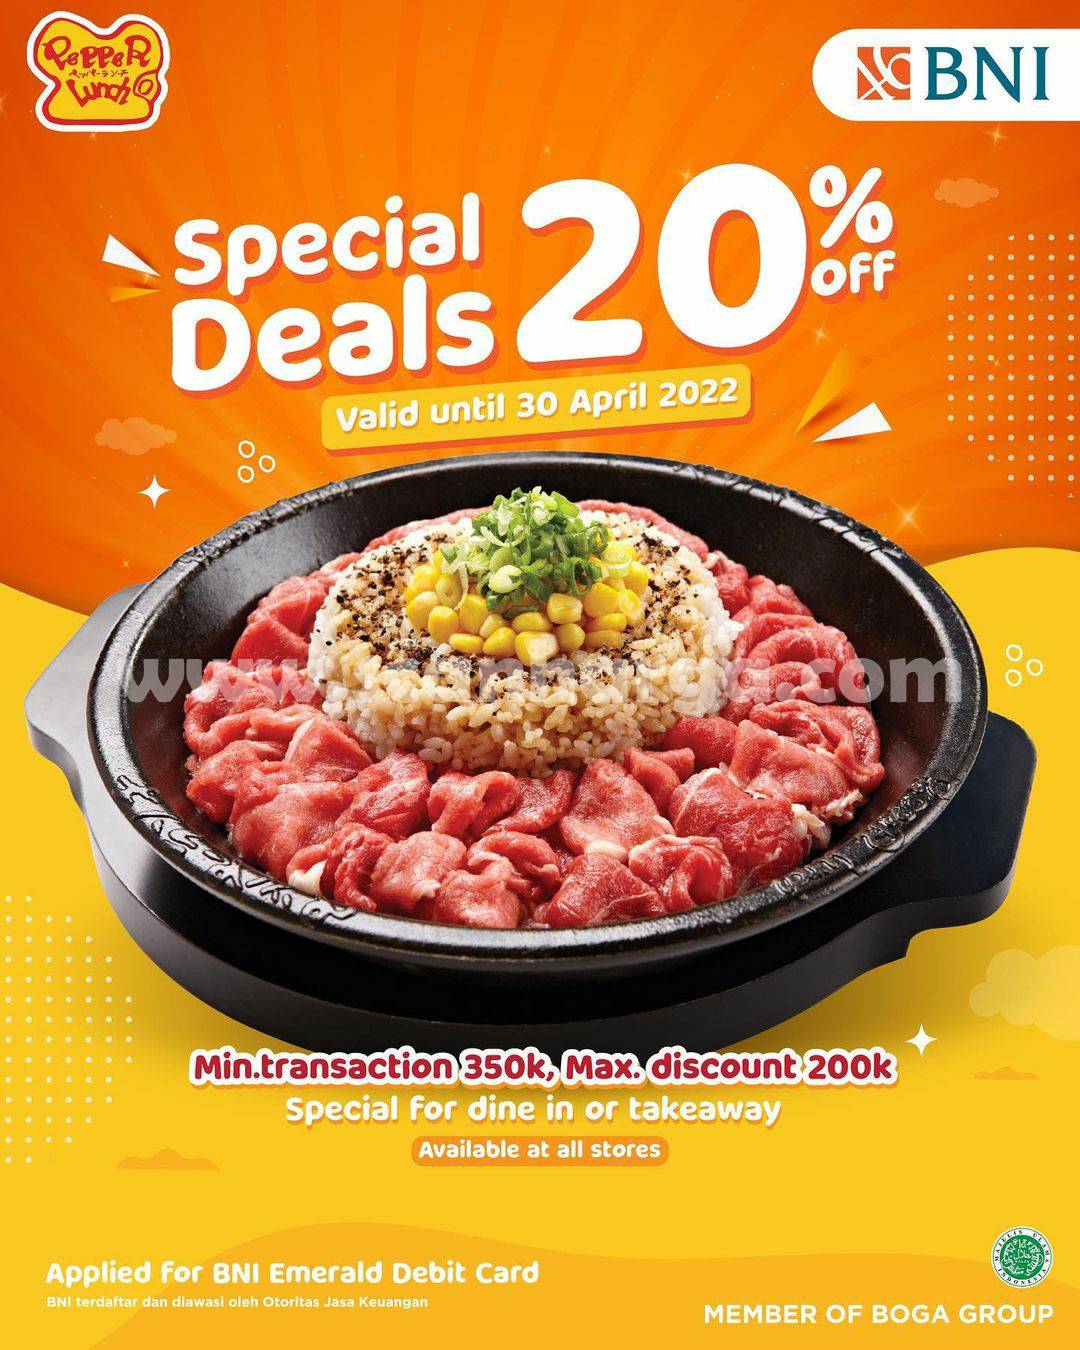 Pepper Lunch Promo Special Deals Disc 20% With BNI Debit Card